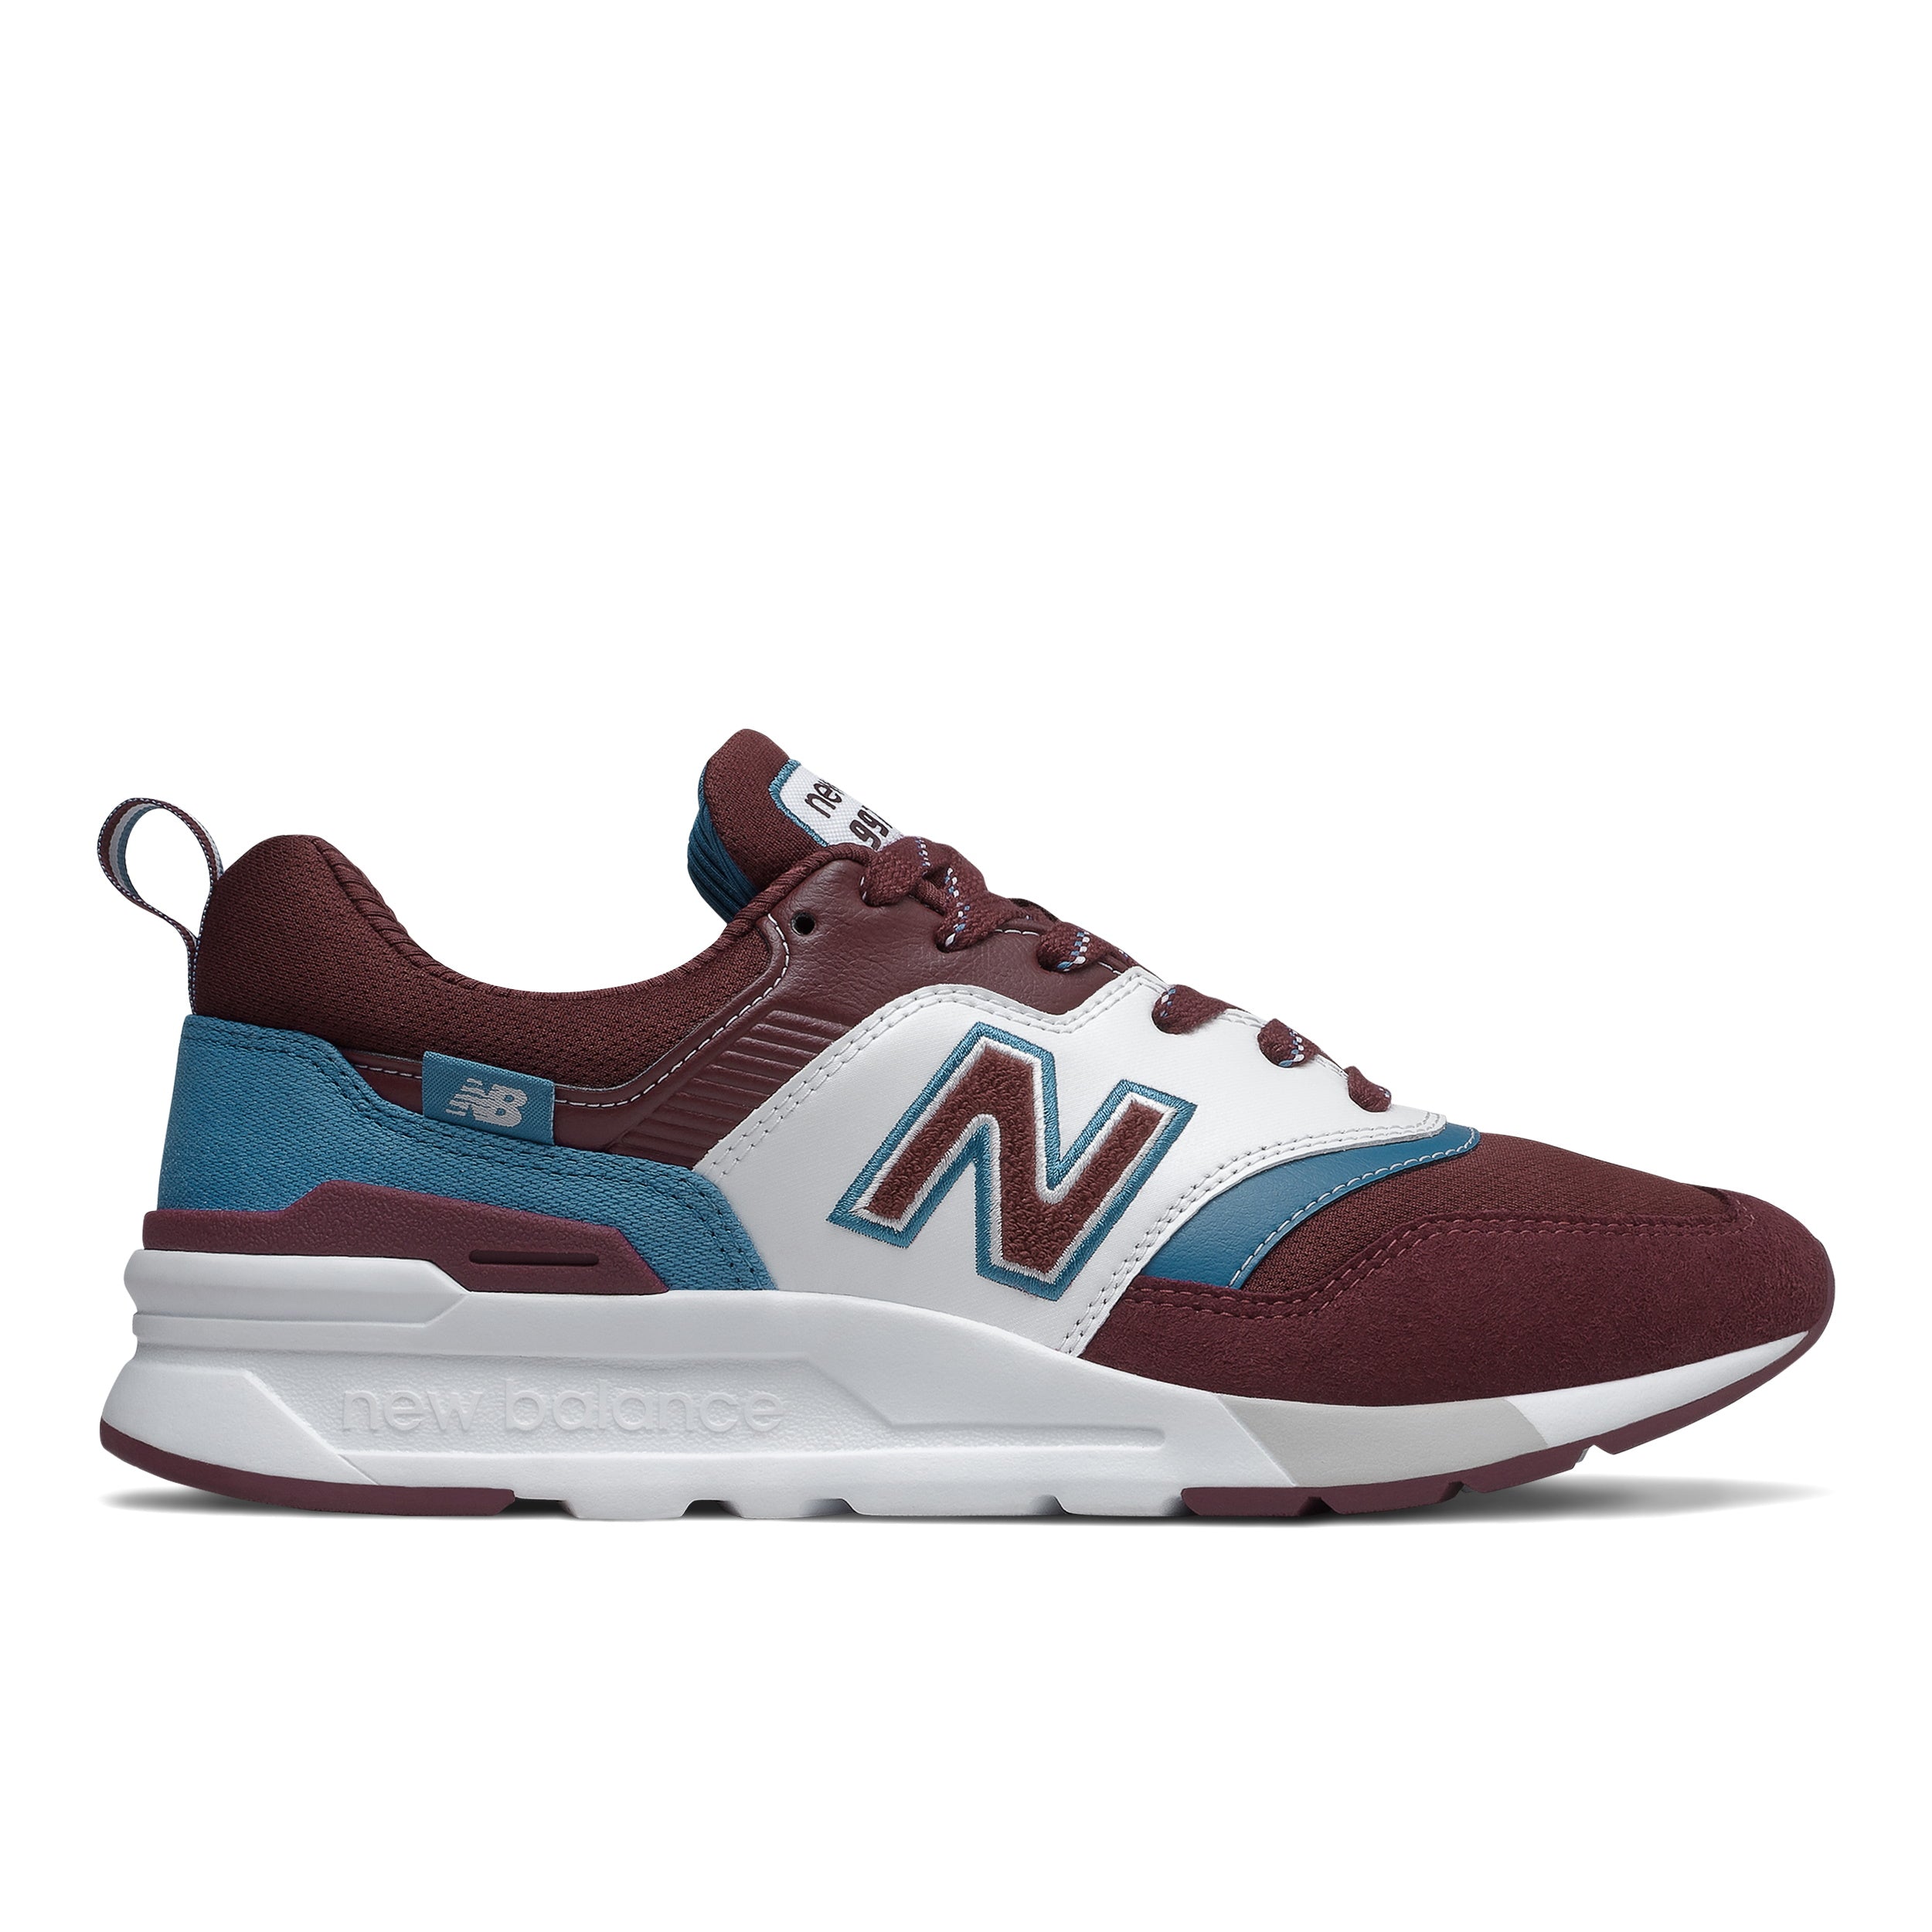 Balance 997 Burgundy Tennis Shoes In Style – InStyle-Tuscaloosa